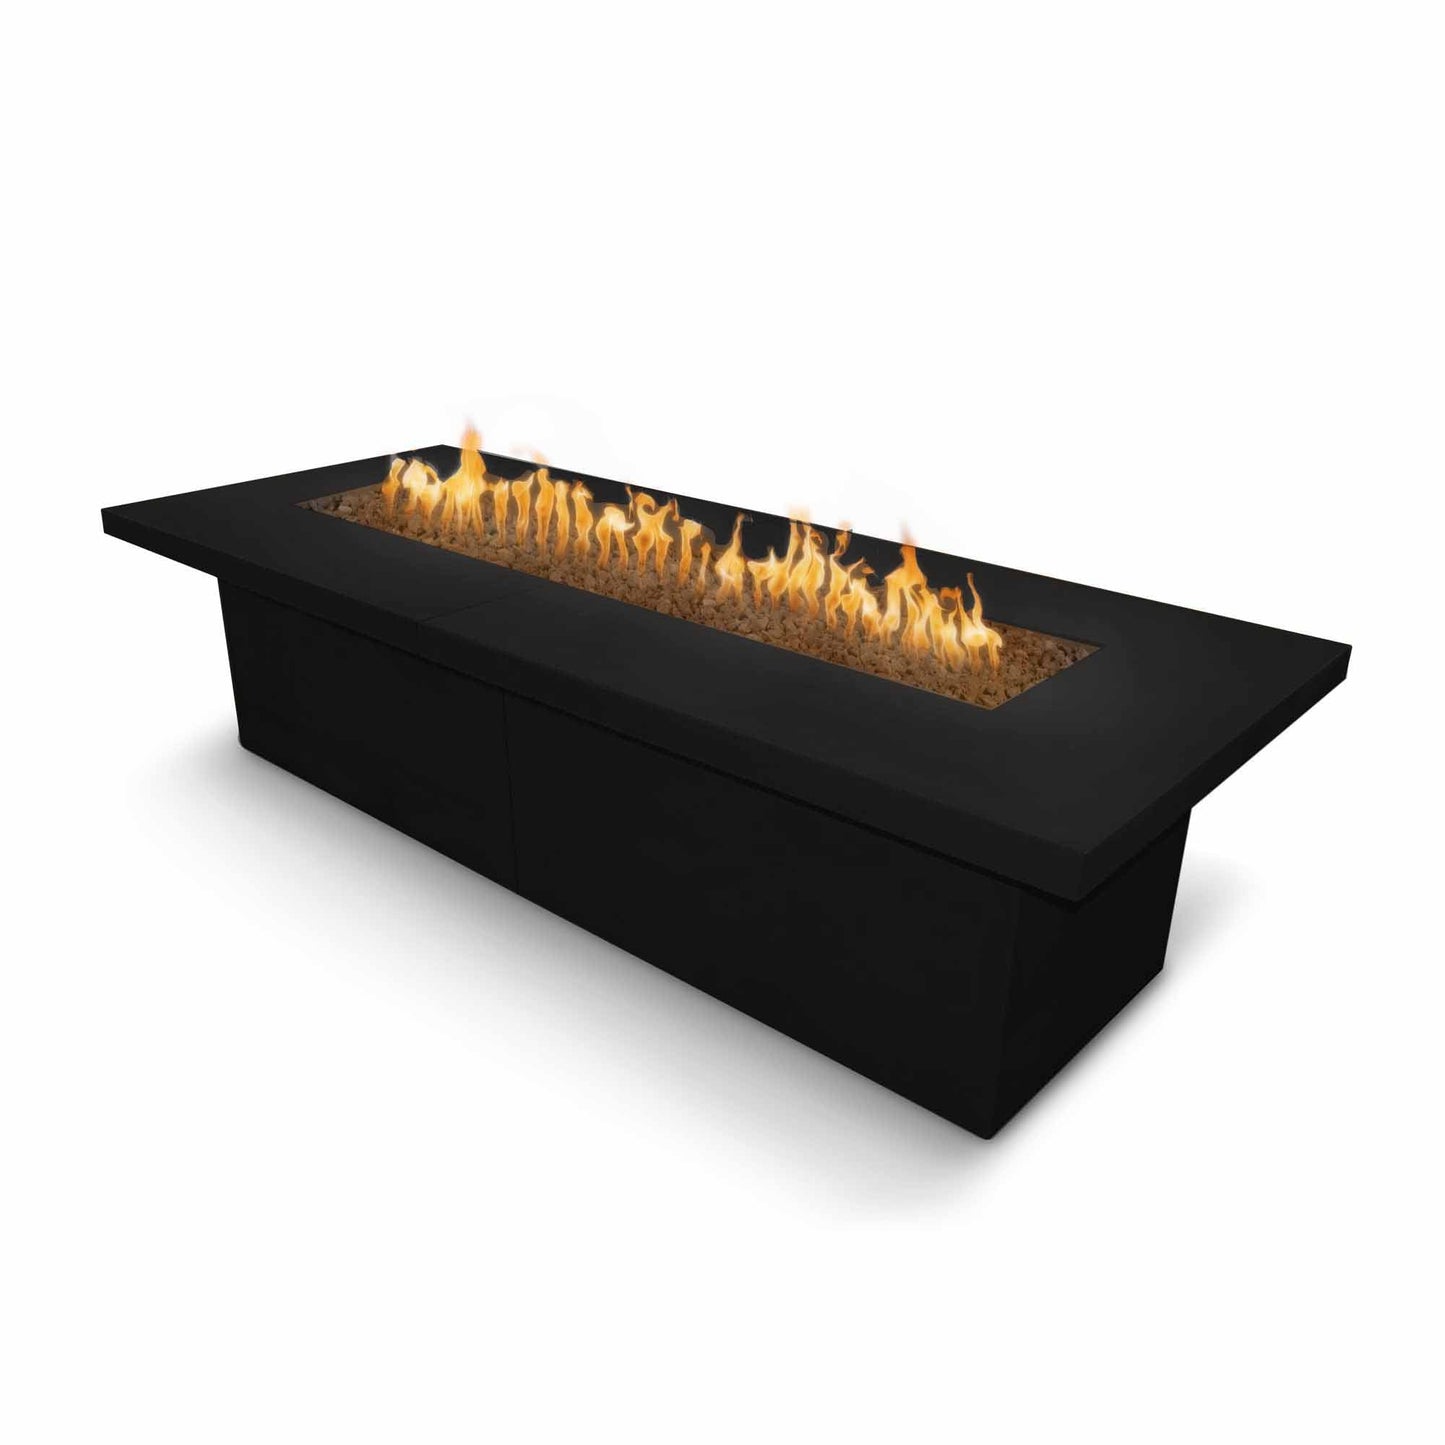 The Outdoor Plus Rectangular Newport 120" Silver Vein Powder Coated Metal Liquid Propane Fire Pit with 110V Electronic Ignition